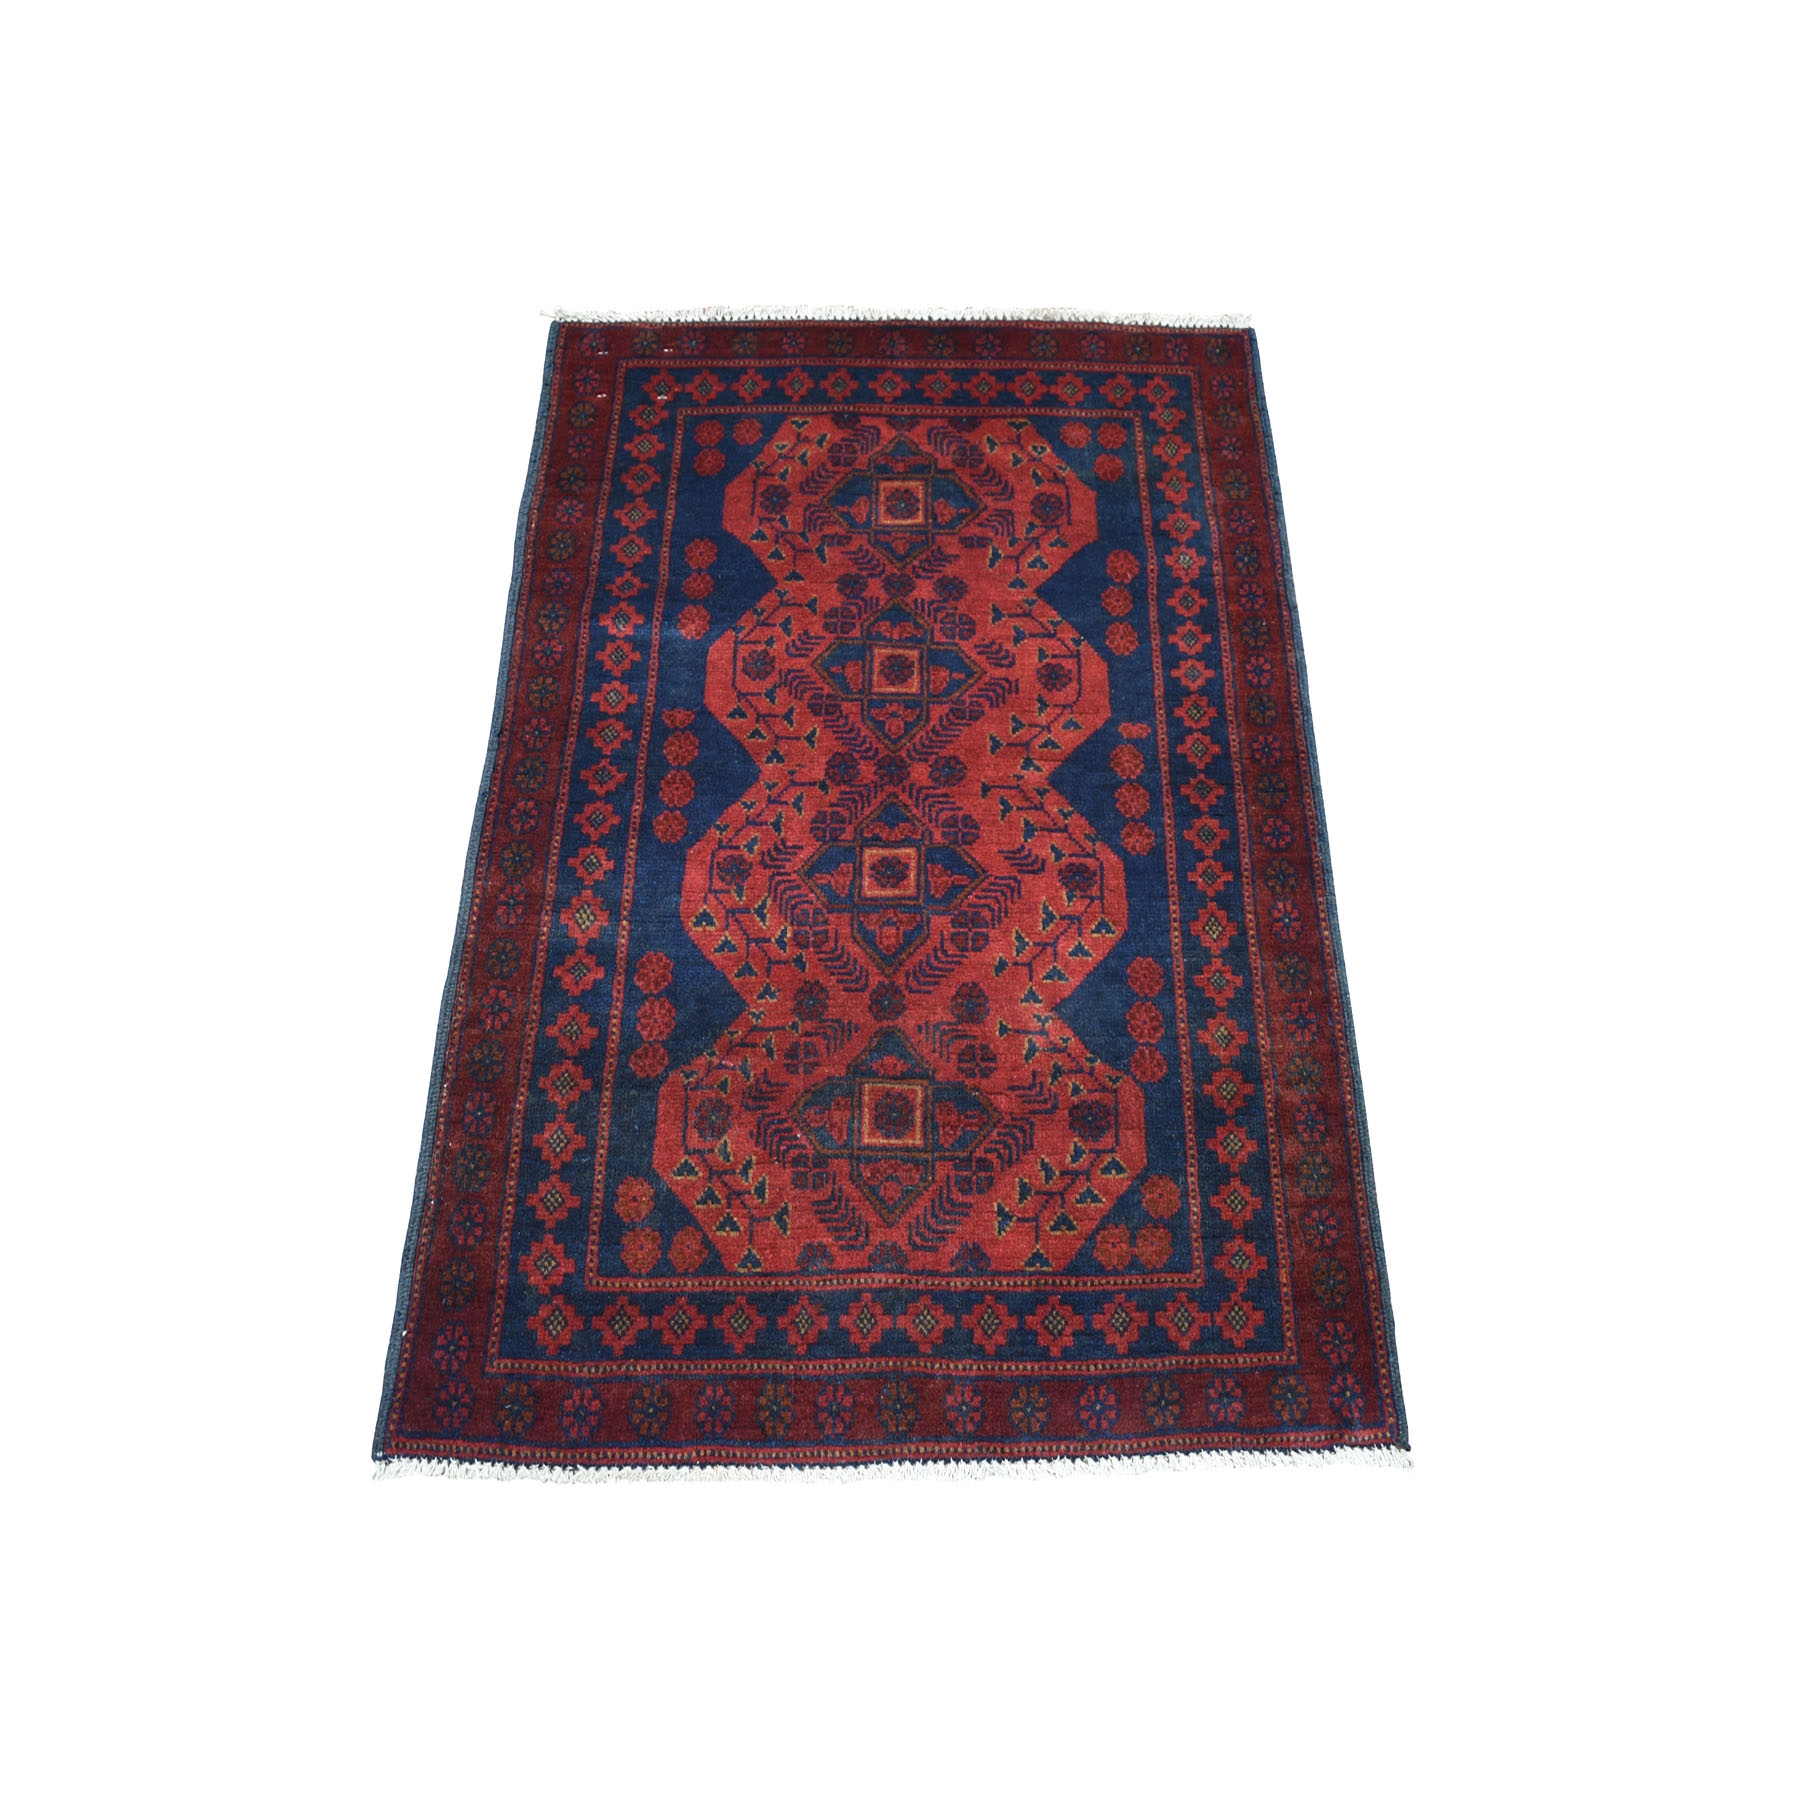 2'8"X3'9" Deep And Saturated Red Geometric Afghan Andkhoy Pure Wool Hand Knotted Oriental Rug moaece09